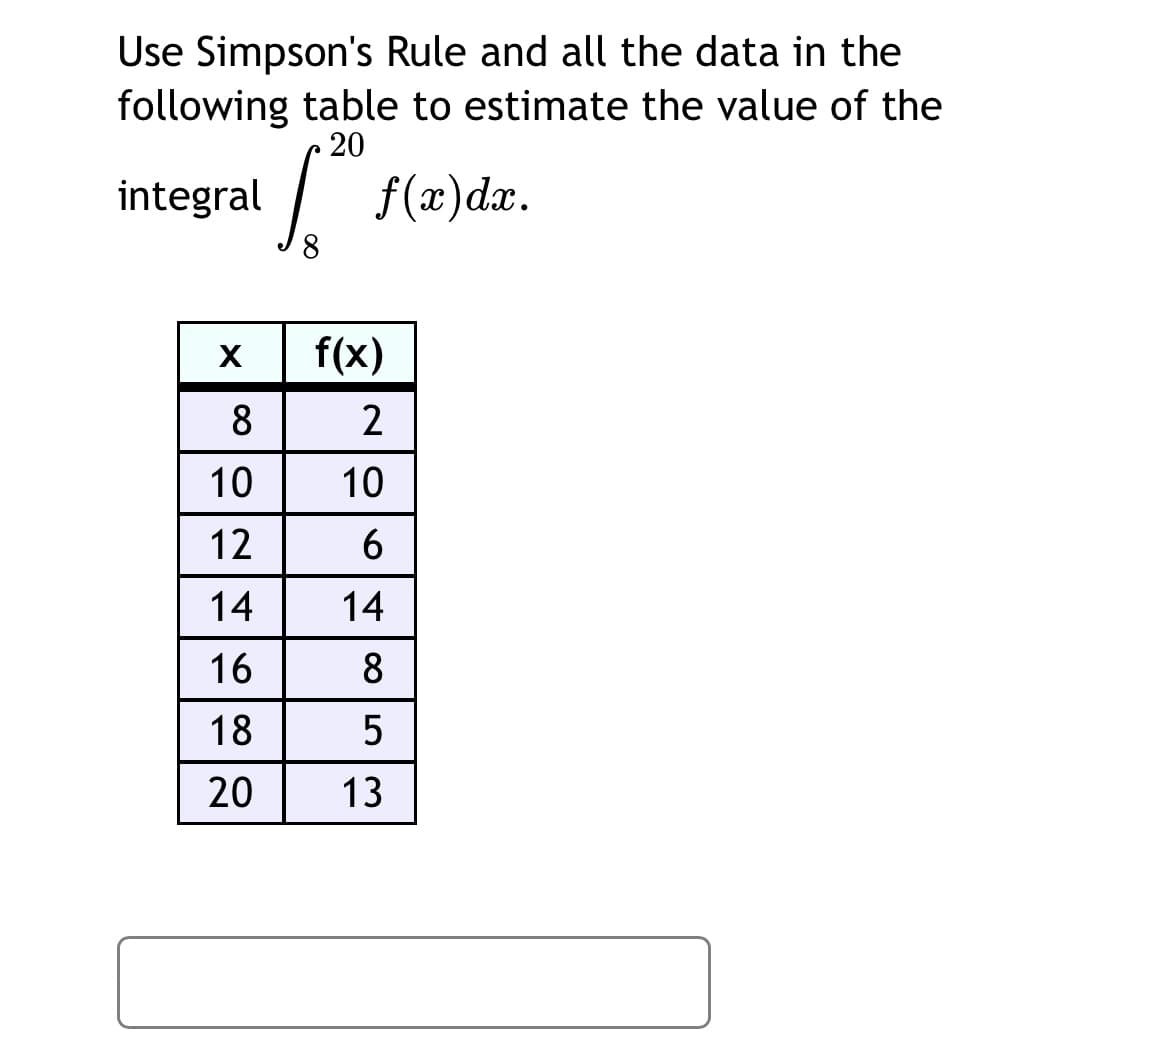 Use Simpson's Rule and all the data in the
following table to estimate the value of the
20
integral
f(x)dx.
f(x)
8
2
10
10
12
14
14
16
8
18
20
13
